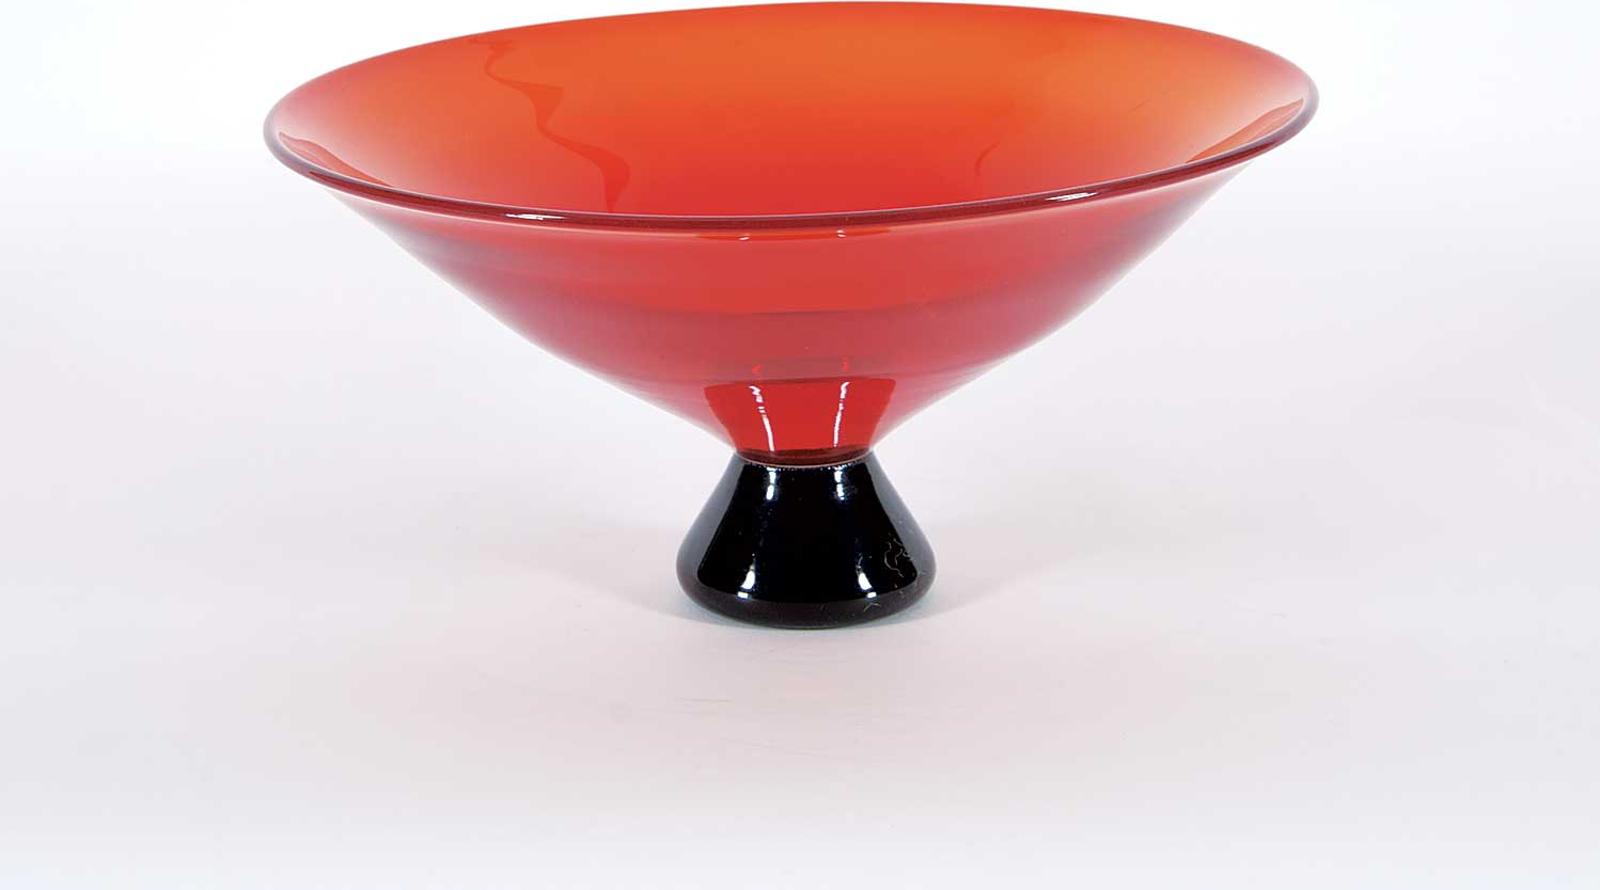 Glass School - Untitled - Red Bowl with Black Base